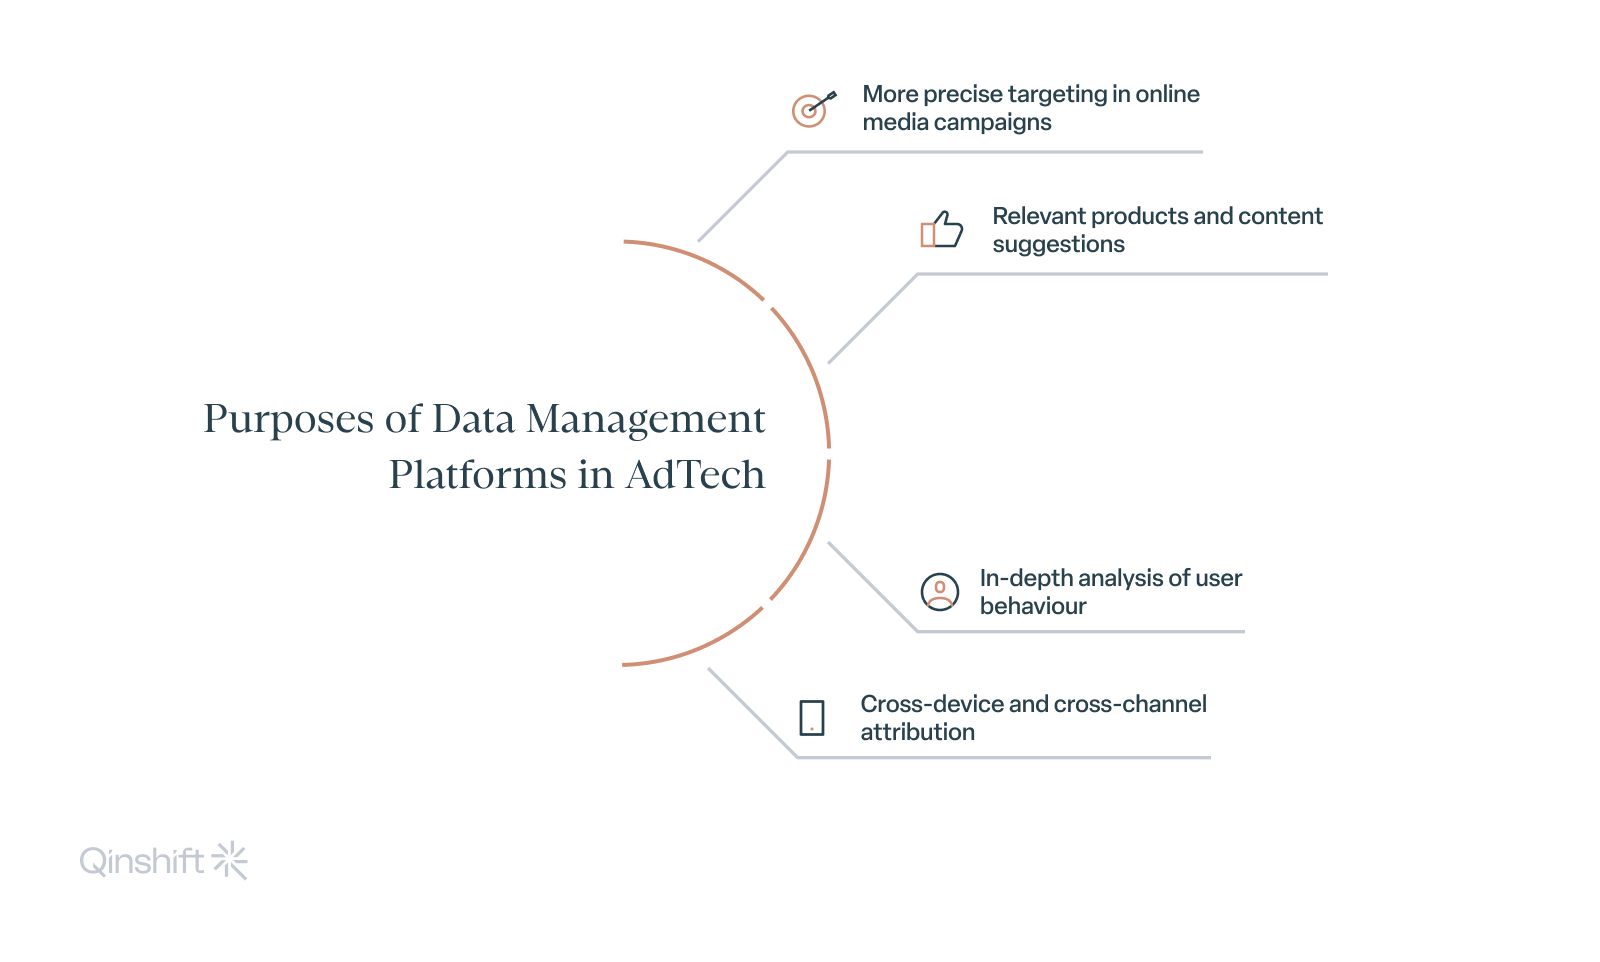 What Is the Purpose of a Data Management Platform in AdTech?